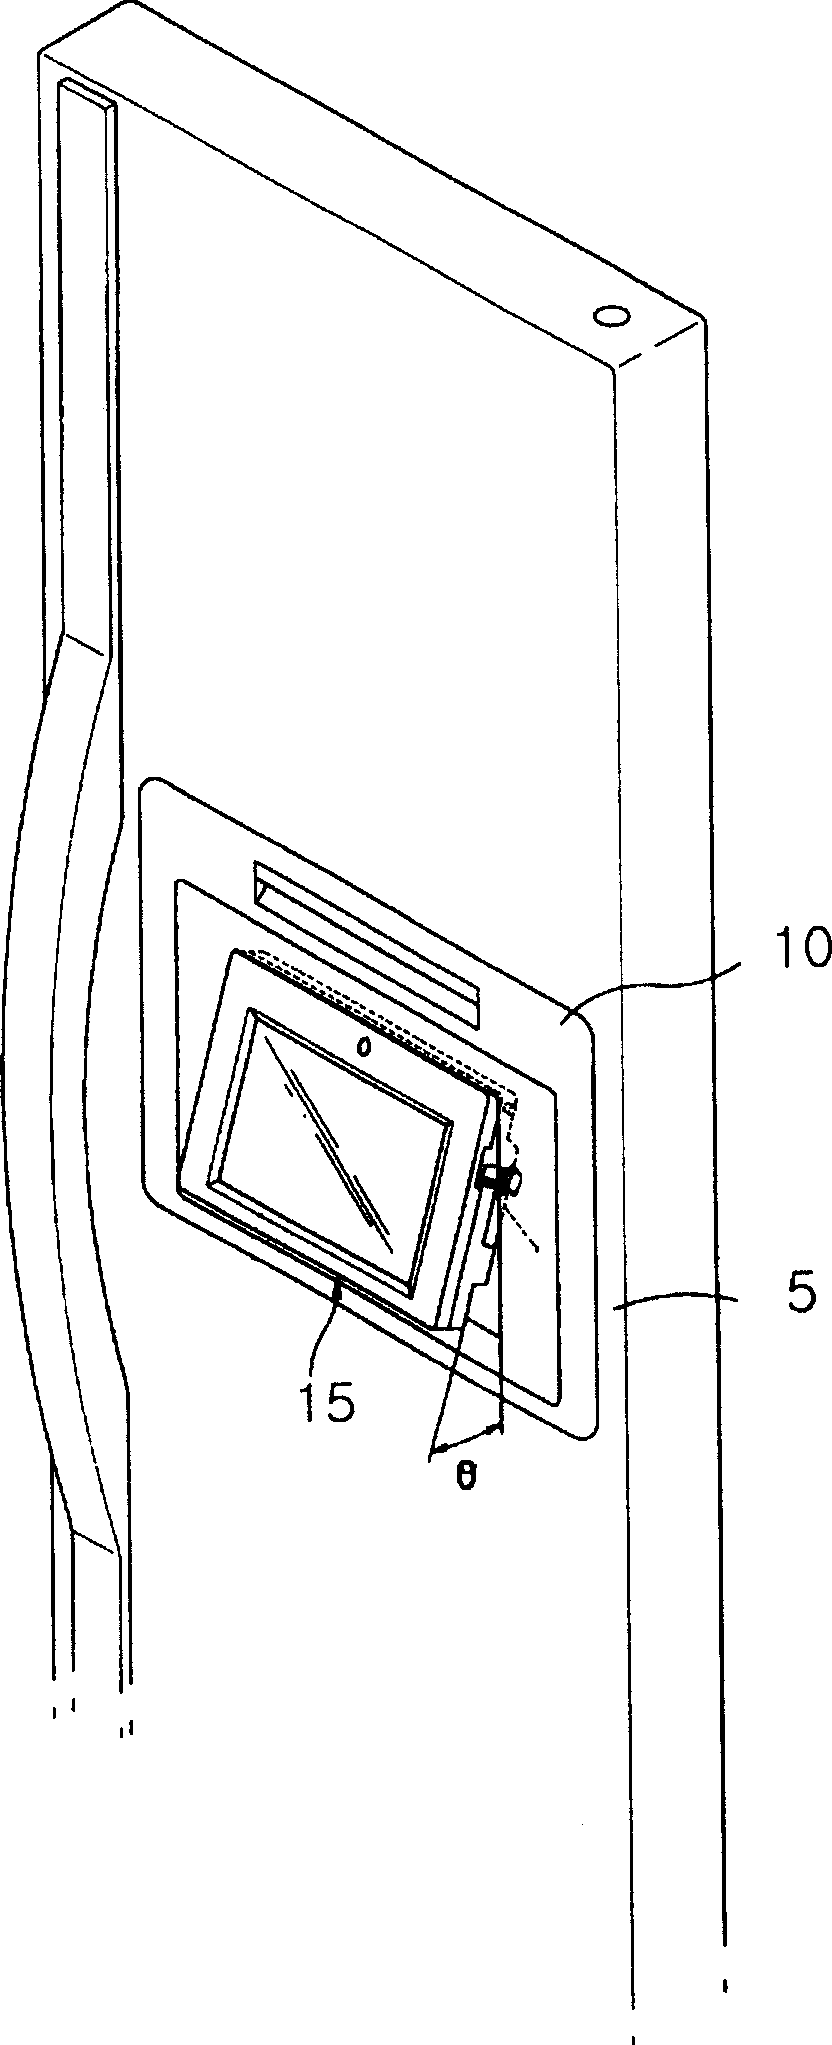 Electric refrigerator with display part